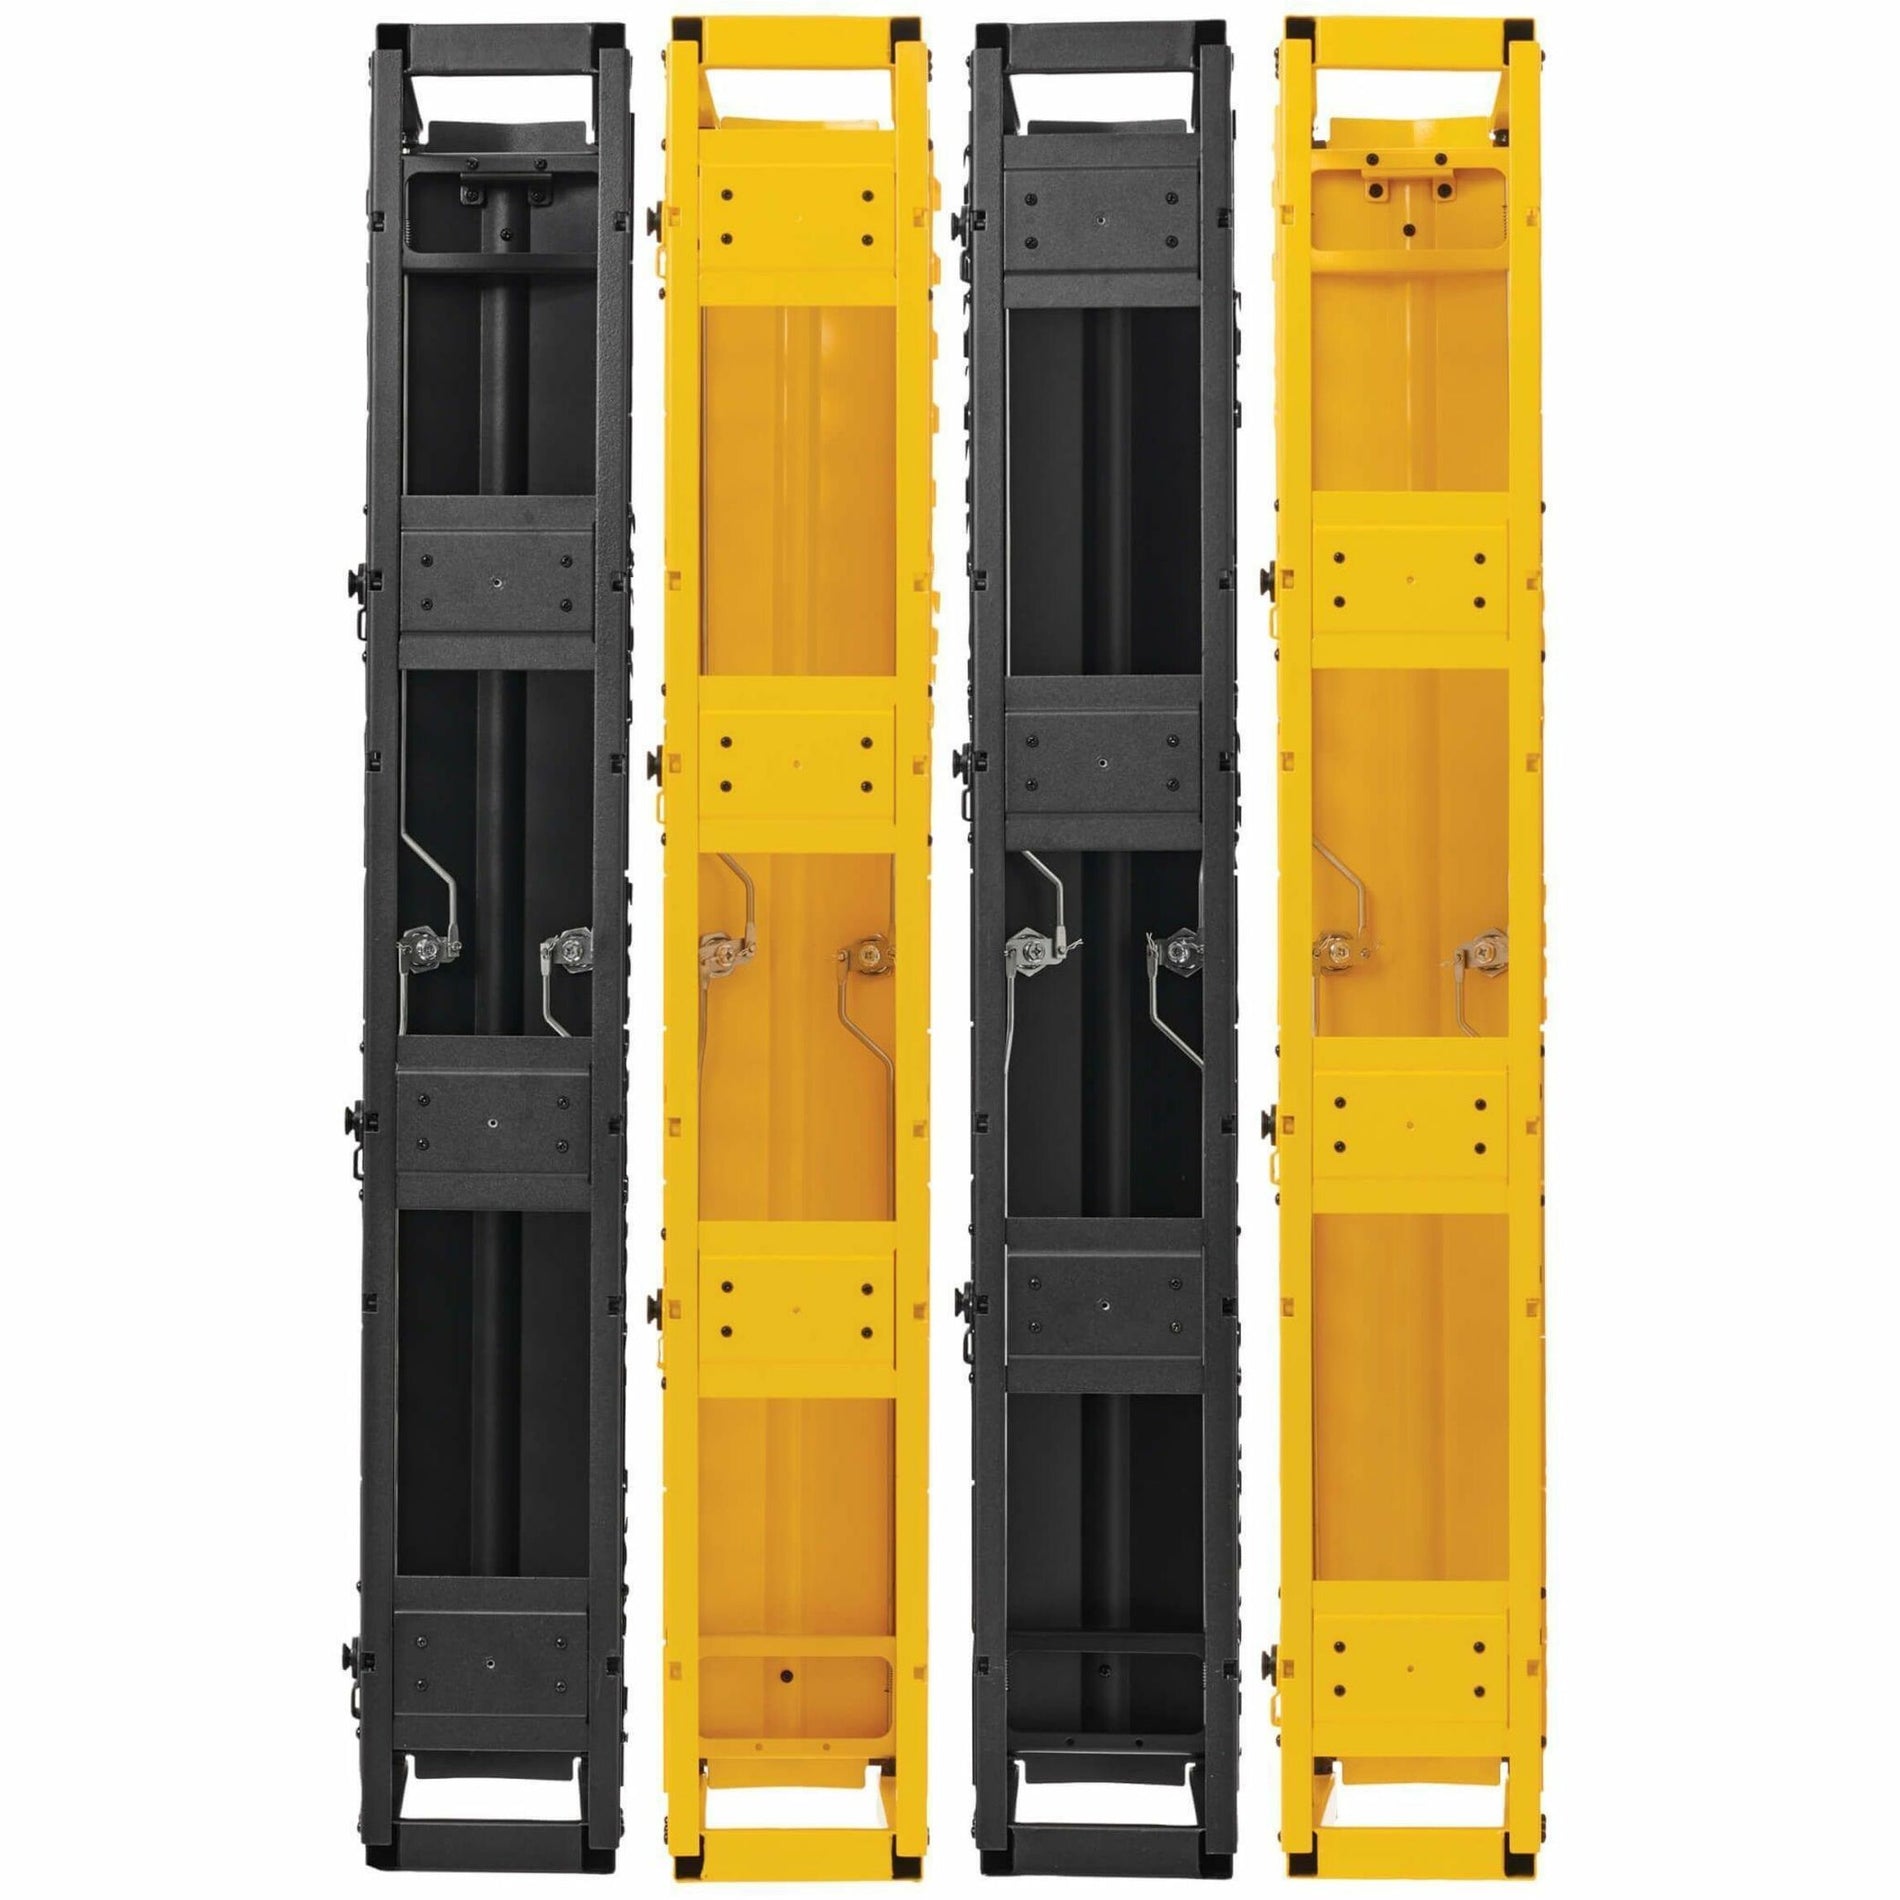 Tripp Lite SRCABLEVRT6HD2F Cable Organizer, Double Sided Finger Duct, 6" Width, Black and Yellow